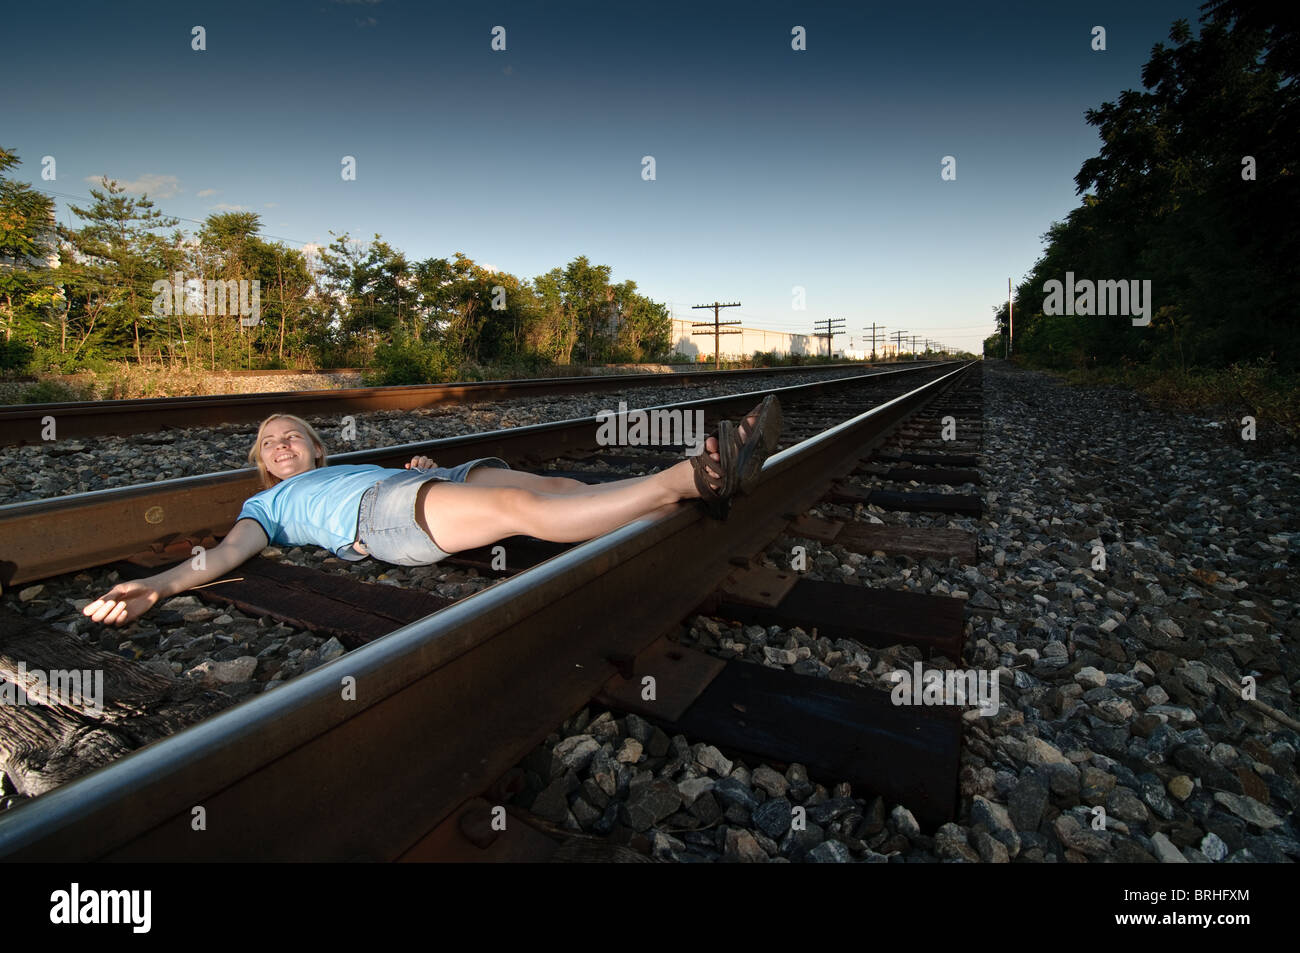 Girl on a train track Stock Photo